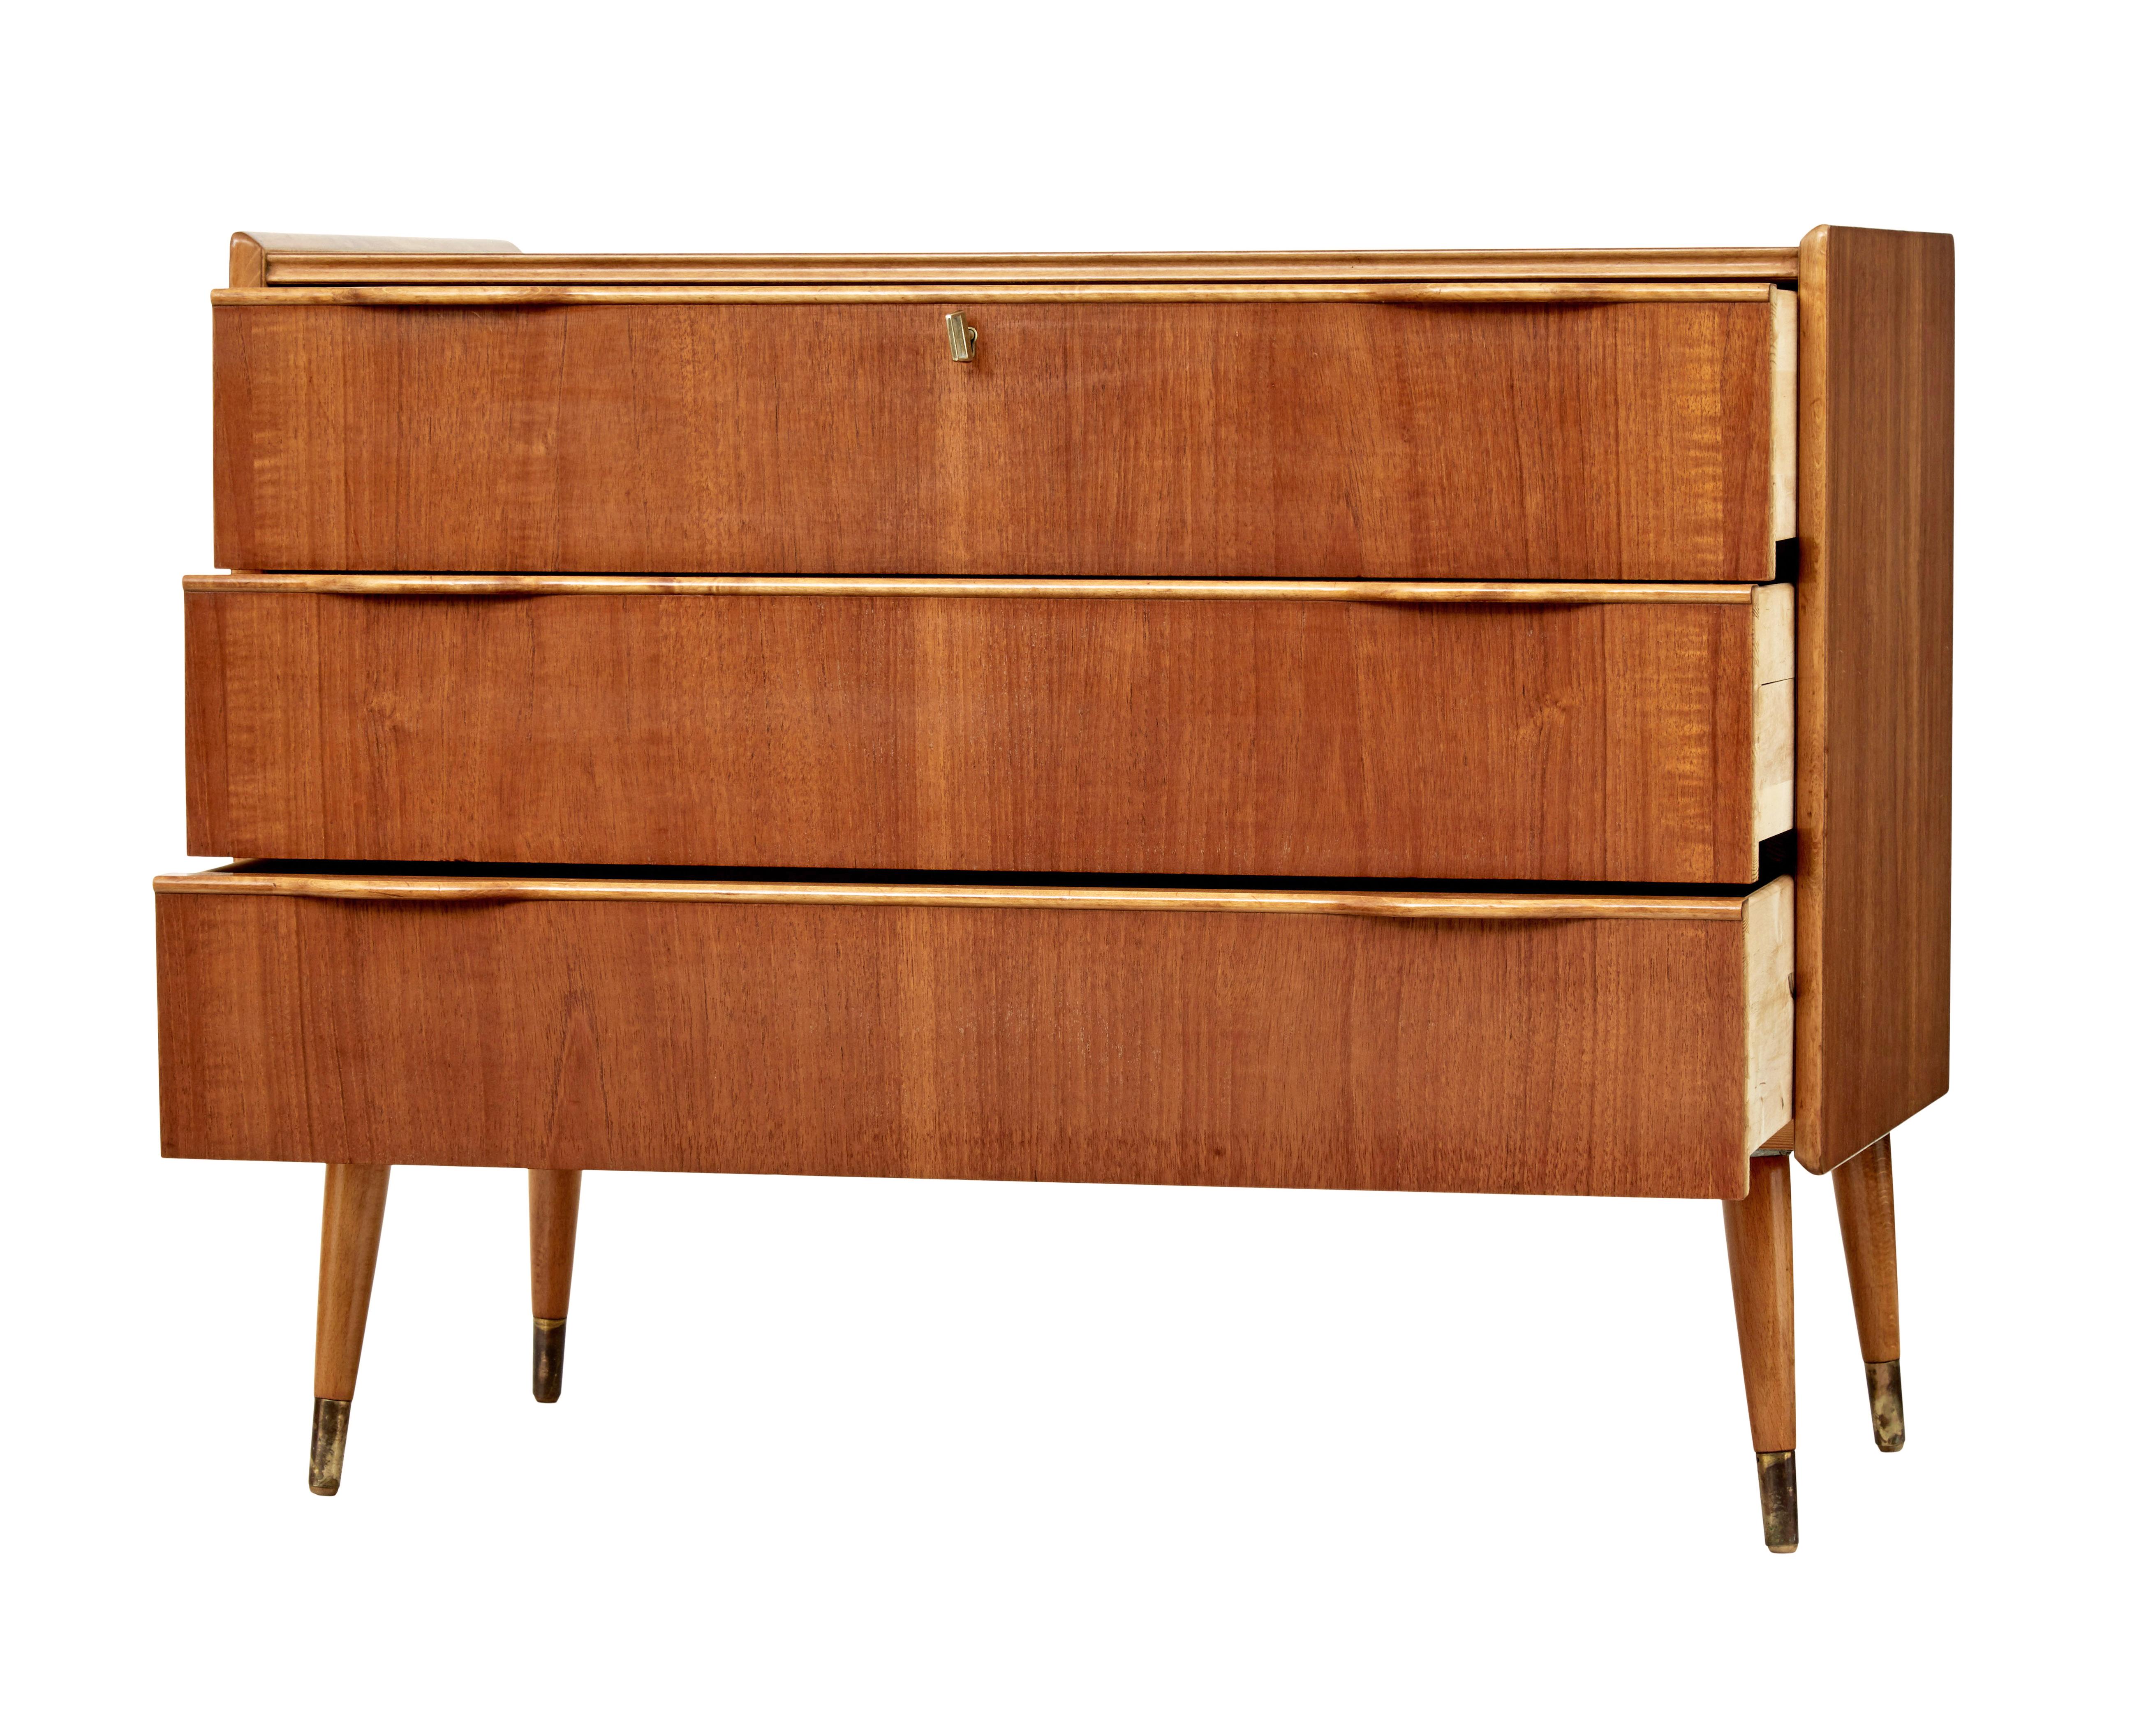 Mid 20th century danish teak chest of drawers by Henning Jorgensen circa 1960.

Minimalist design by well known danish designer Henning Jorgensen, for Fredericia Møbelfabrik.  Featuring 3 drawers with sculpted handles.

Standing on 4 tapering legs